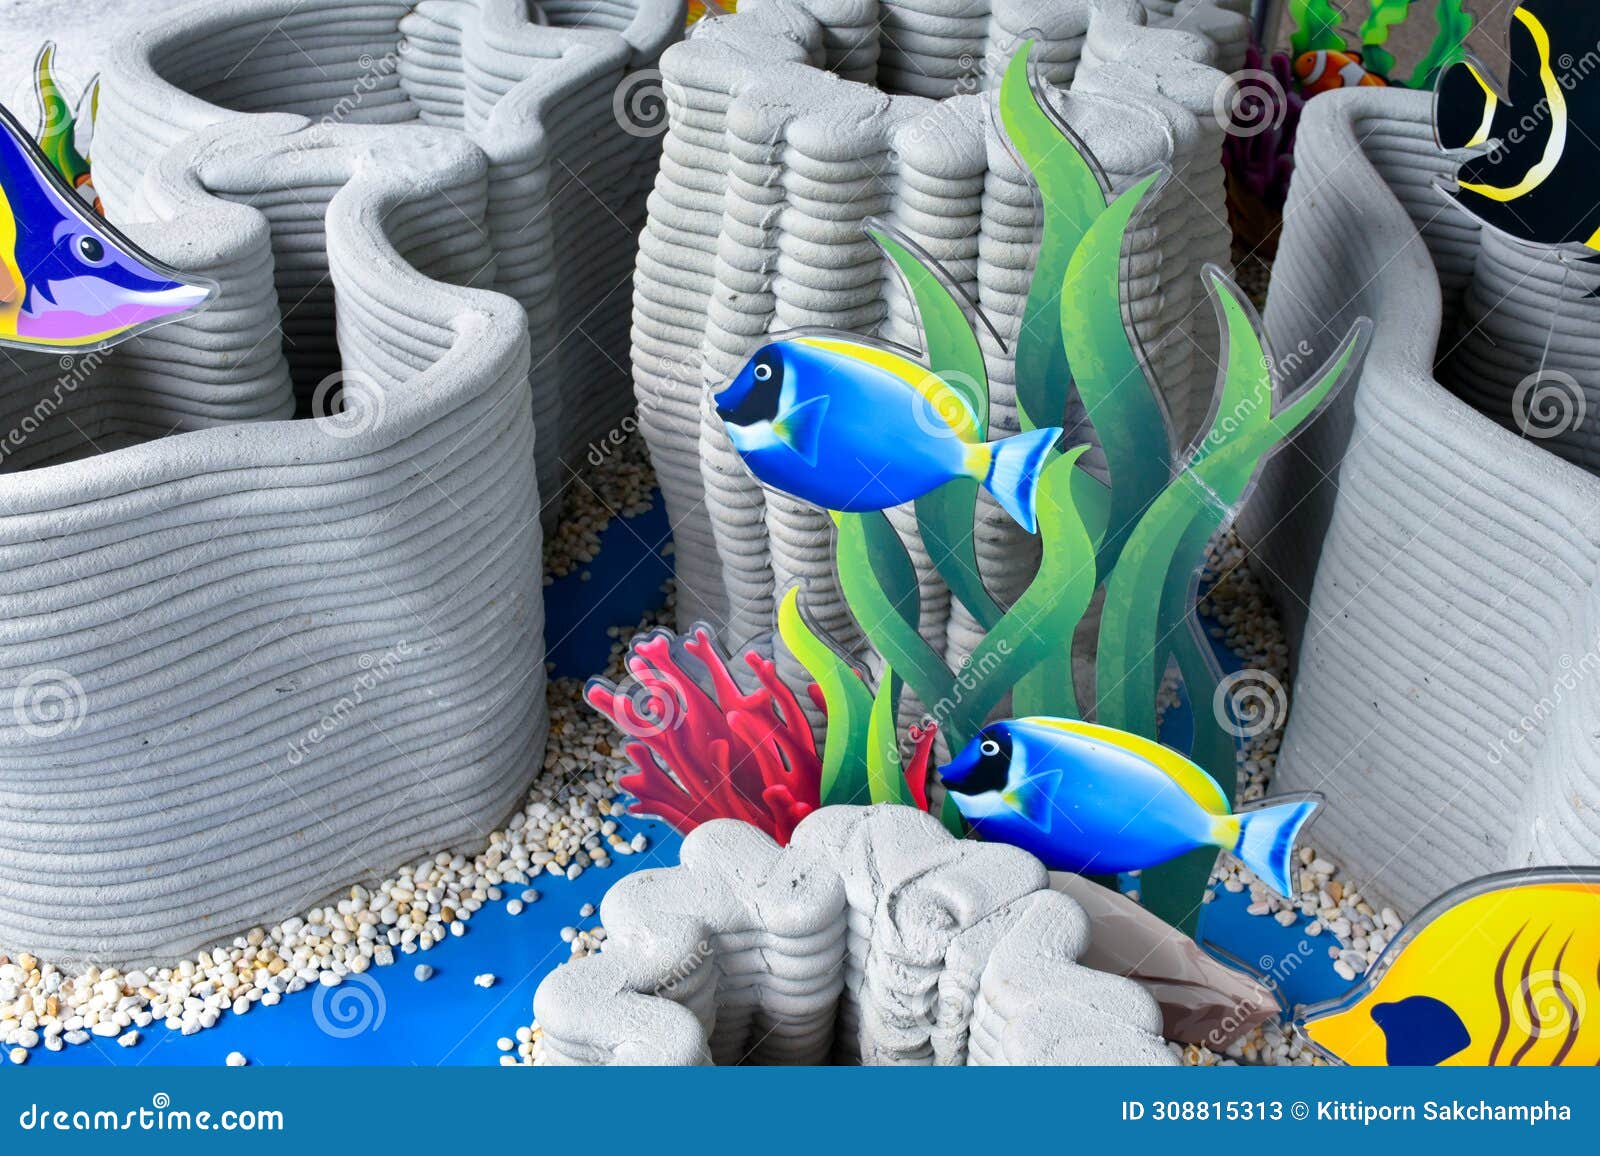 artificial coral reef models and marine fish models are beautifully arranged to be used as props to simulate the ocean or sea